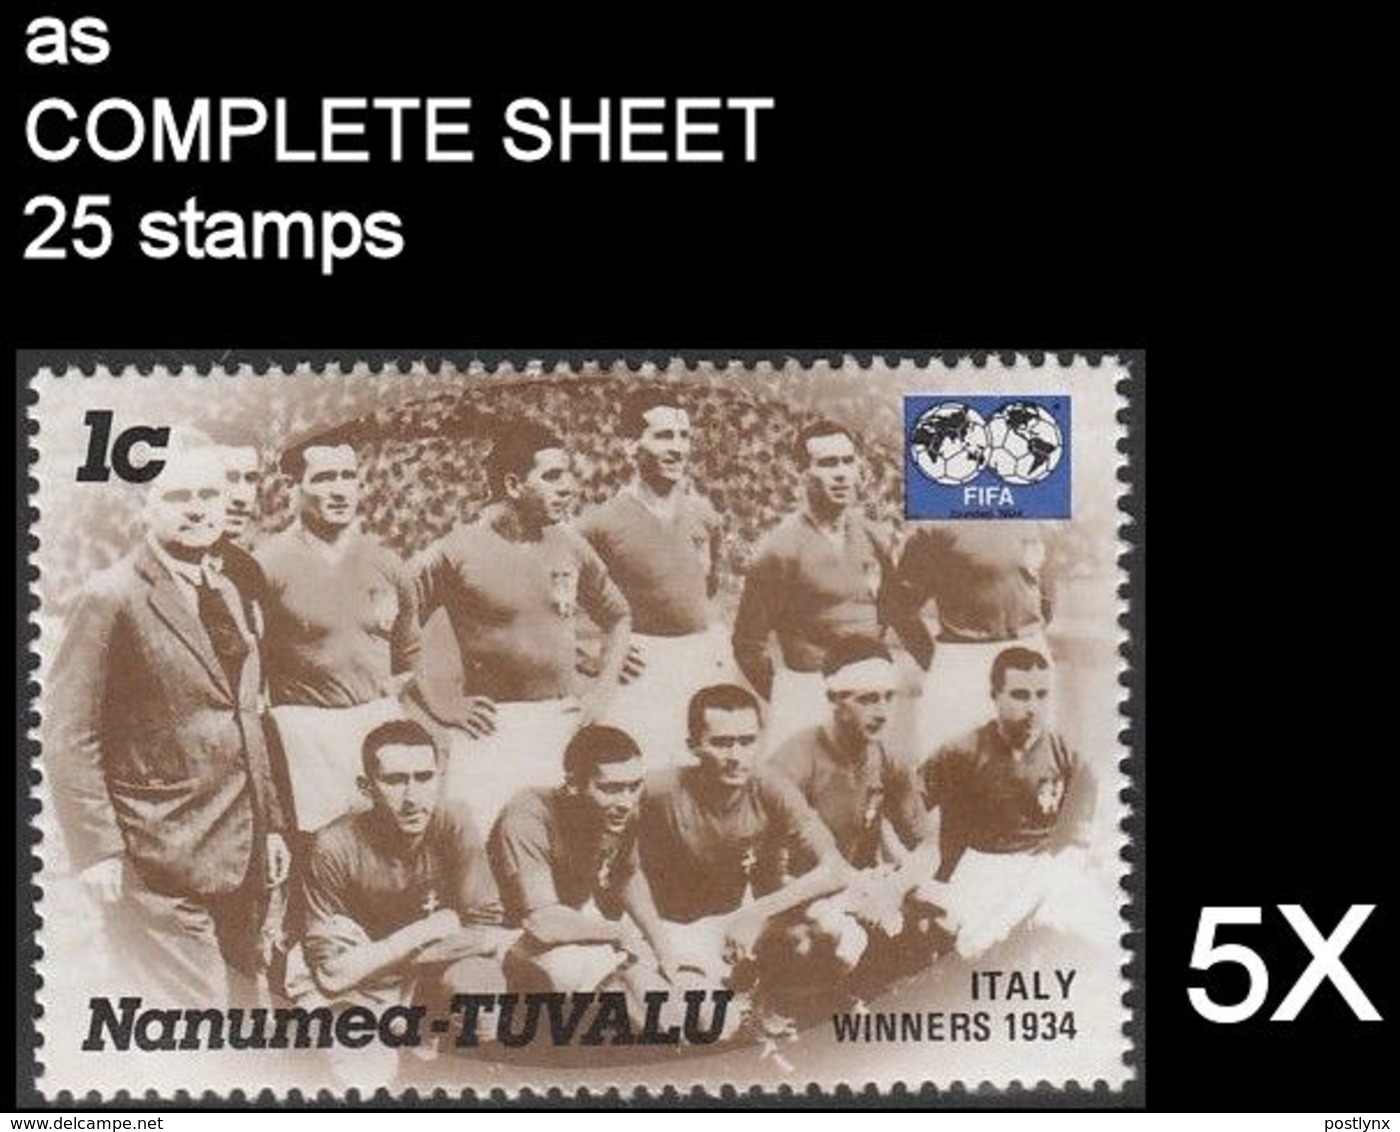 CV:€27.81  BULK:5x  TUVALU-Nanumea 1986 World Cup Mexico Italy 1934 1c COMPLETE SHEET:25 Stamps - 1934 – Italy